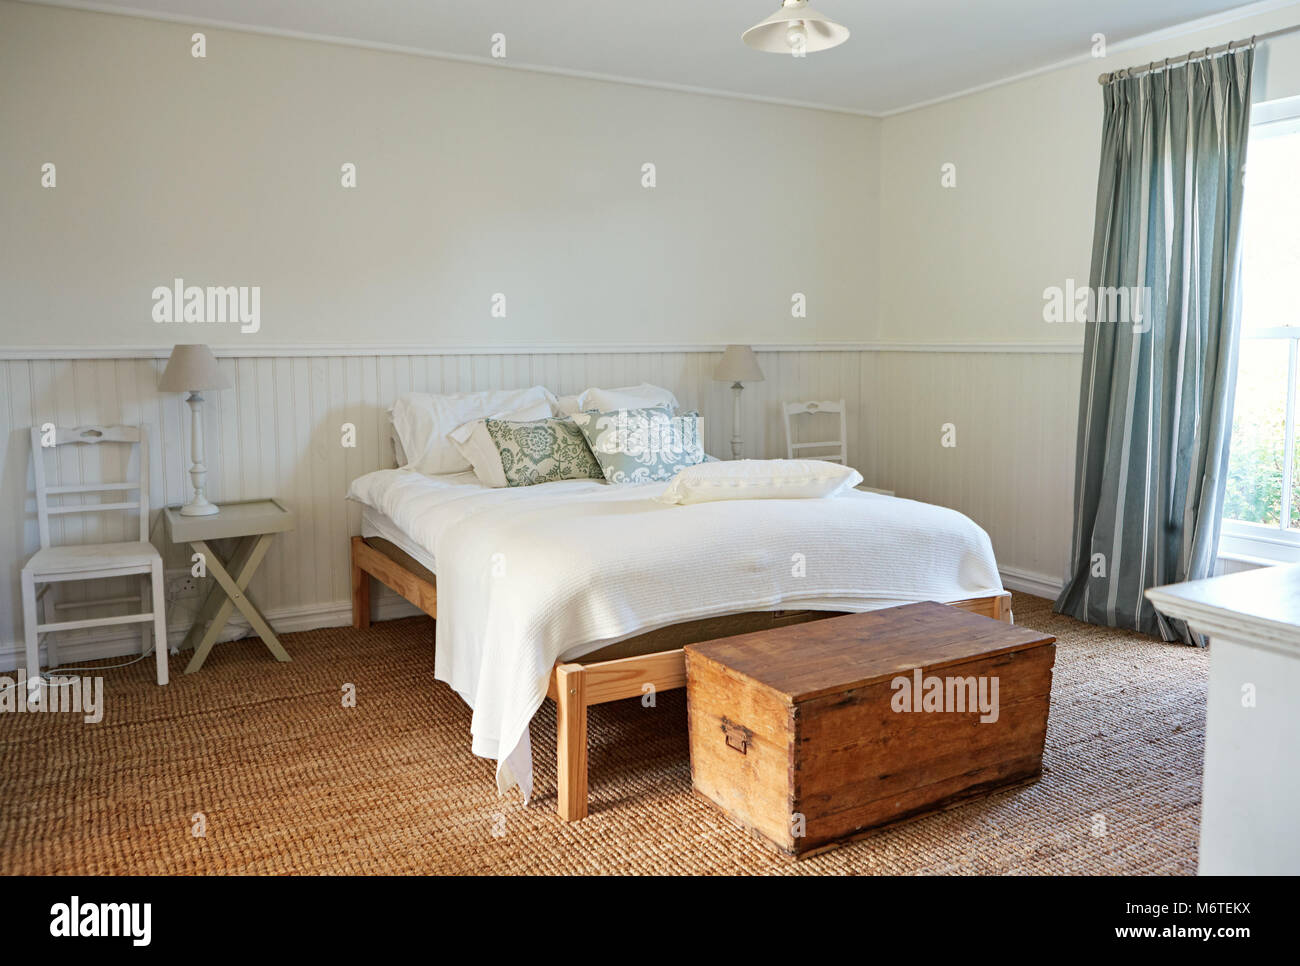 Interior of a comfortable bedroom in a country style home Stock Photo